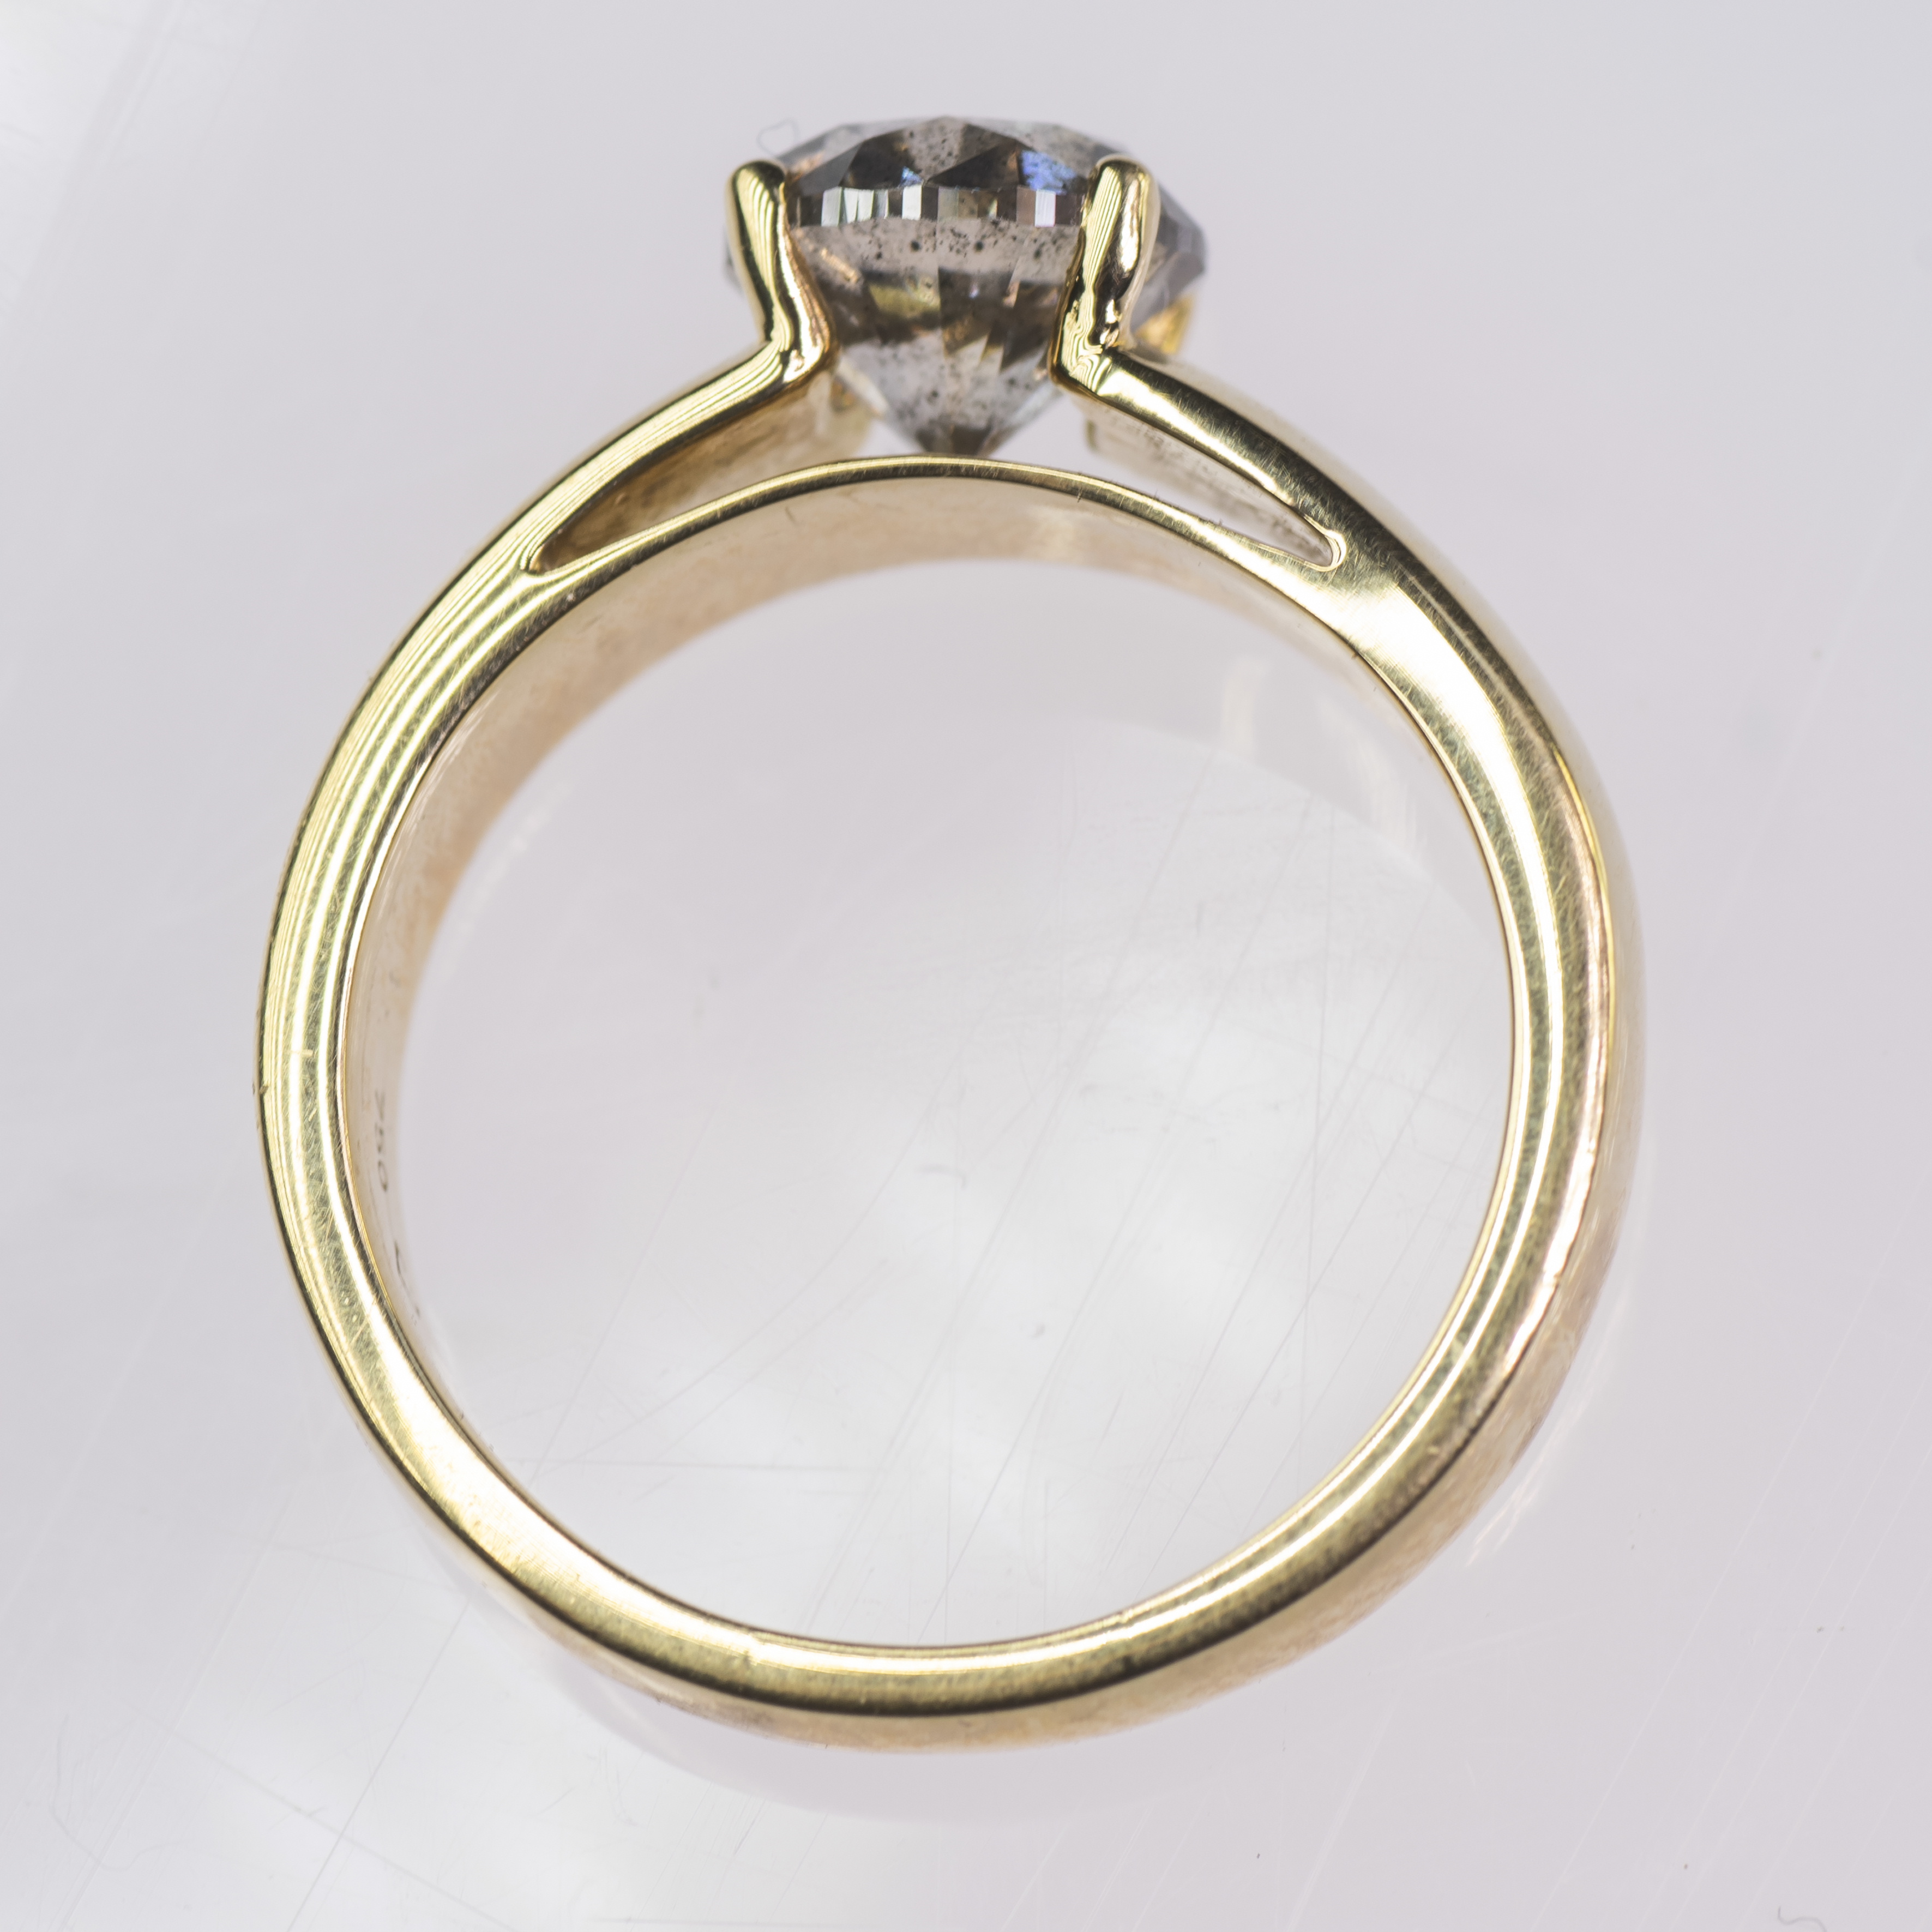 AN 18CT YELLOW GOLD AND BRILLIANT CUT DIAMOND RING - Image 2 of 3